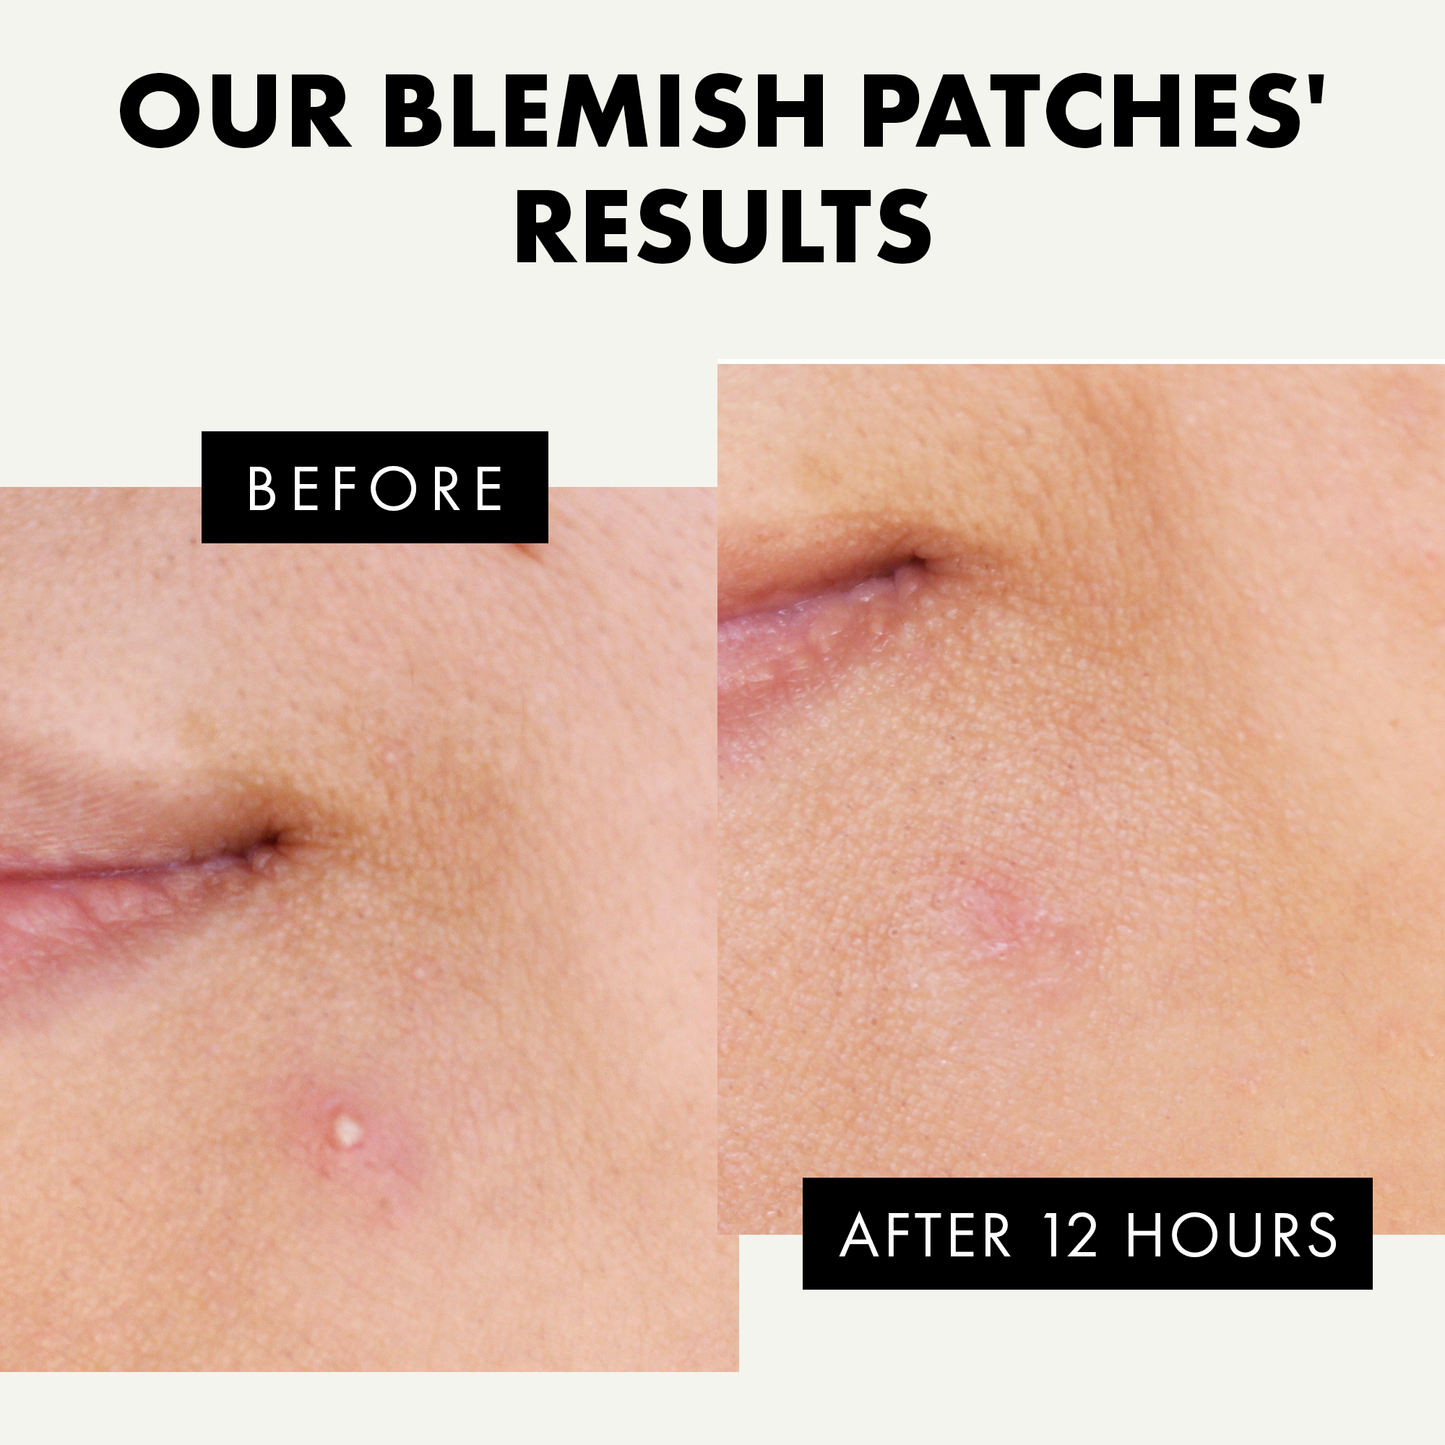 𝗢𝗿𝗴𝗮𝗻𝗶𝗰 Acne Patches